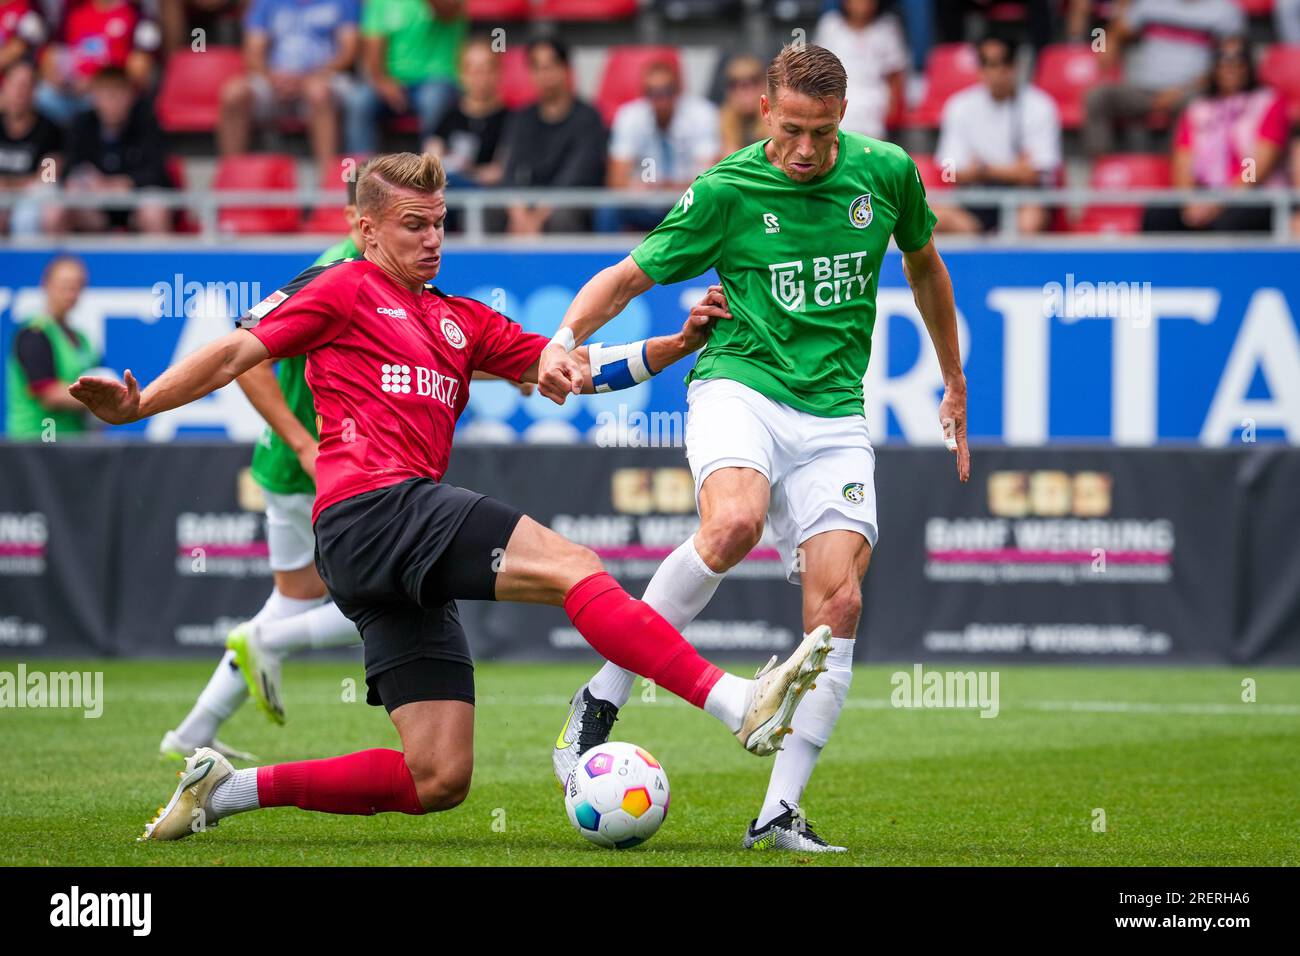 Taunusstein Wehen, Germany. 22nd July, 2023. TAUNUSSTEIN-WEHEN, GERMANY - JULY 22: Paul Gladon of Fortuna Sittard battles for the ball with Florian Carstens of Wehen Wiesbaden during the Pre-Season Friendly match between SV Wehen Wiesbaden and Fortuna Sittard at the BRITA-Arena on July 22, 2023 in Taunusstein-Wehen, Germany (Photo by Orange Pictures) Credit: Orange Pics BV/Alamy Live News Stock Photo